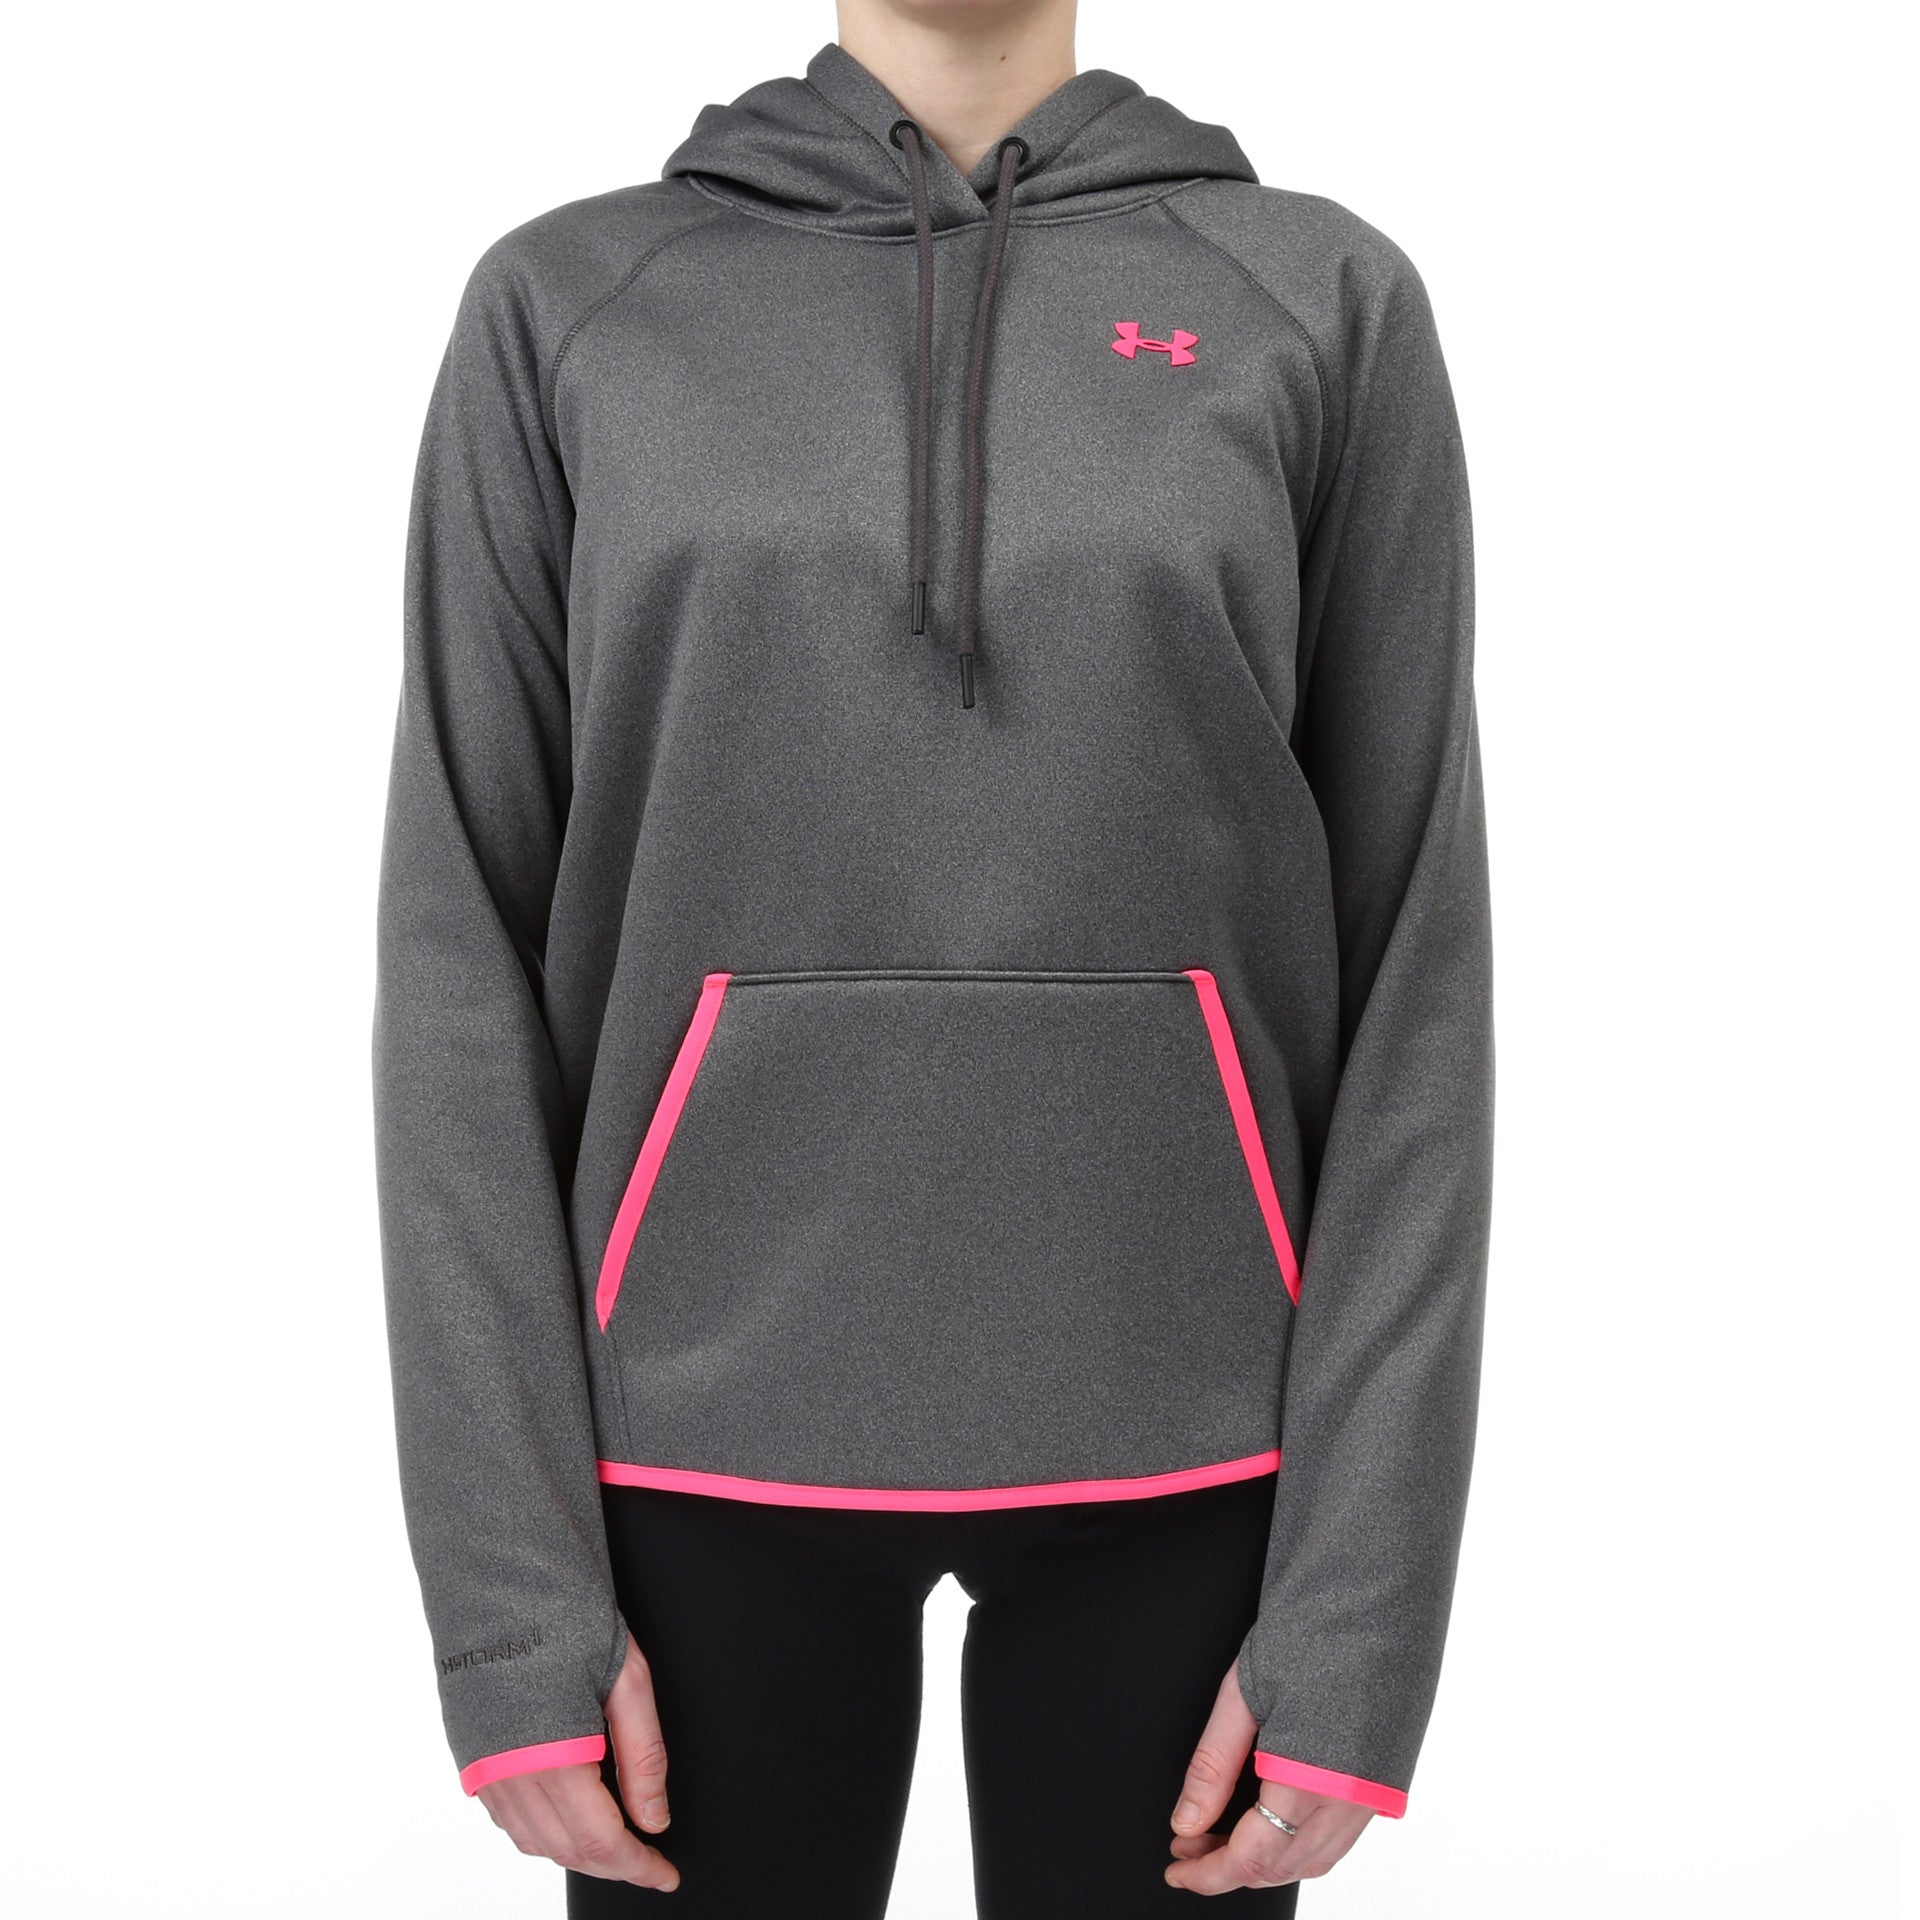 Under Armour Storm Armour Lightweight - Carbon Heather - New Star